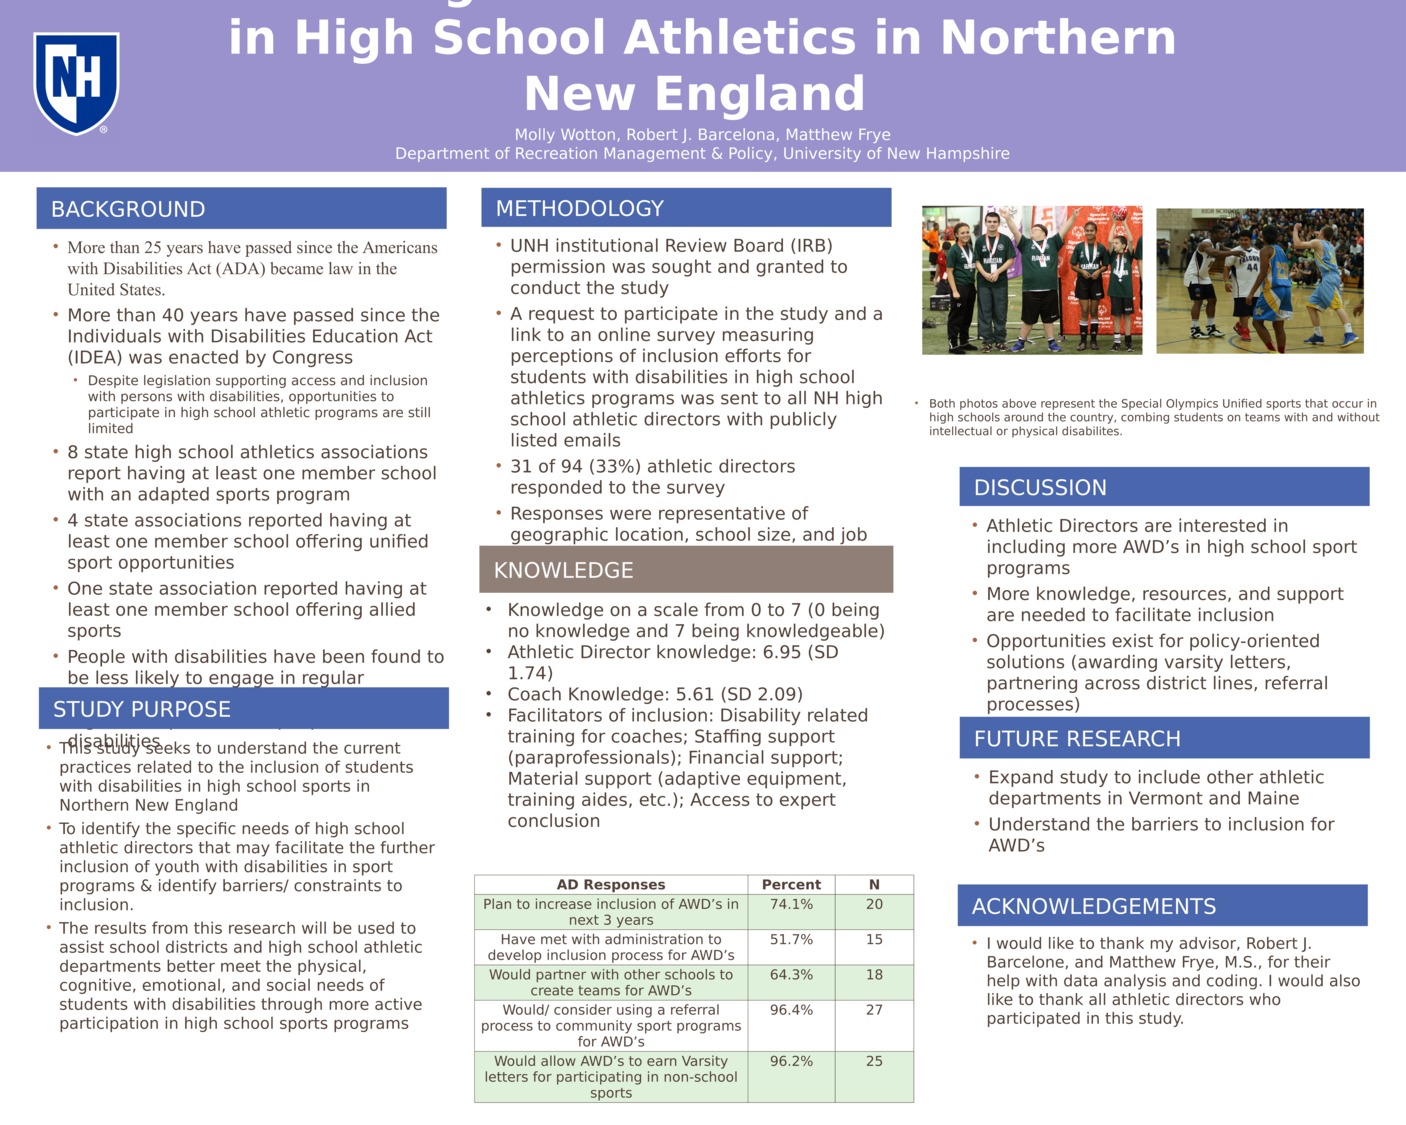 Including Students With Disabilities In High School Athletics In New Hampshire by mlw2005